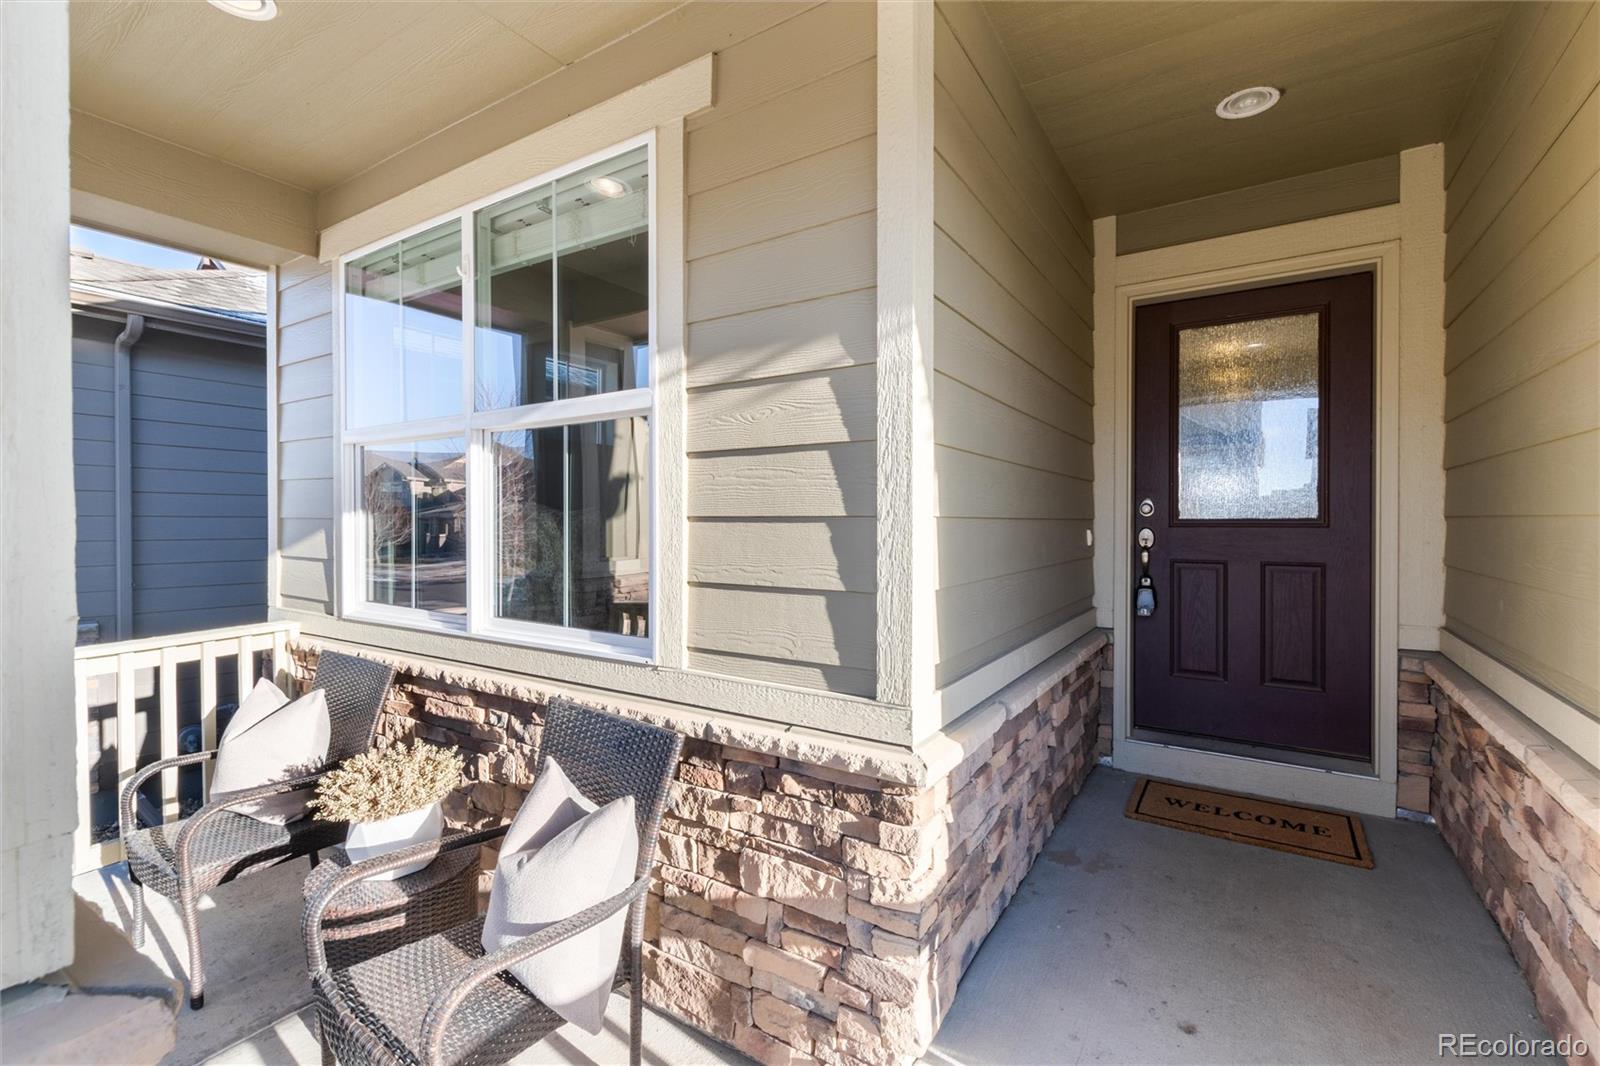 Report Image for 16662  Compass Way,Broomfield, Colorado